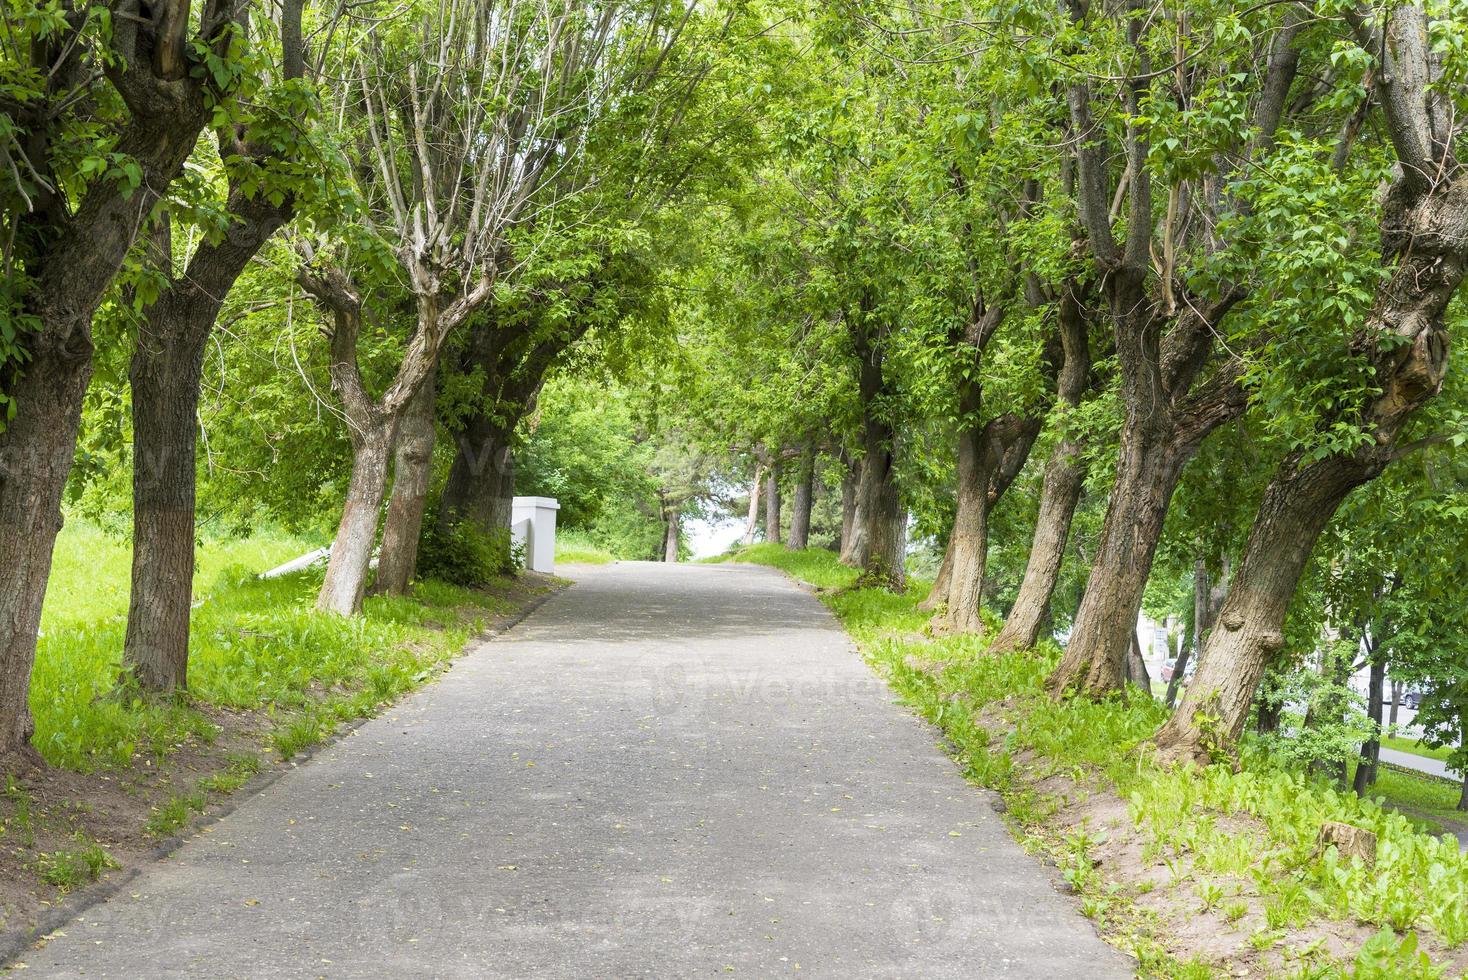 paved roads between trees and green grass, empty roads in the village area with shrubs and trees on the side photo